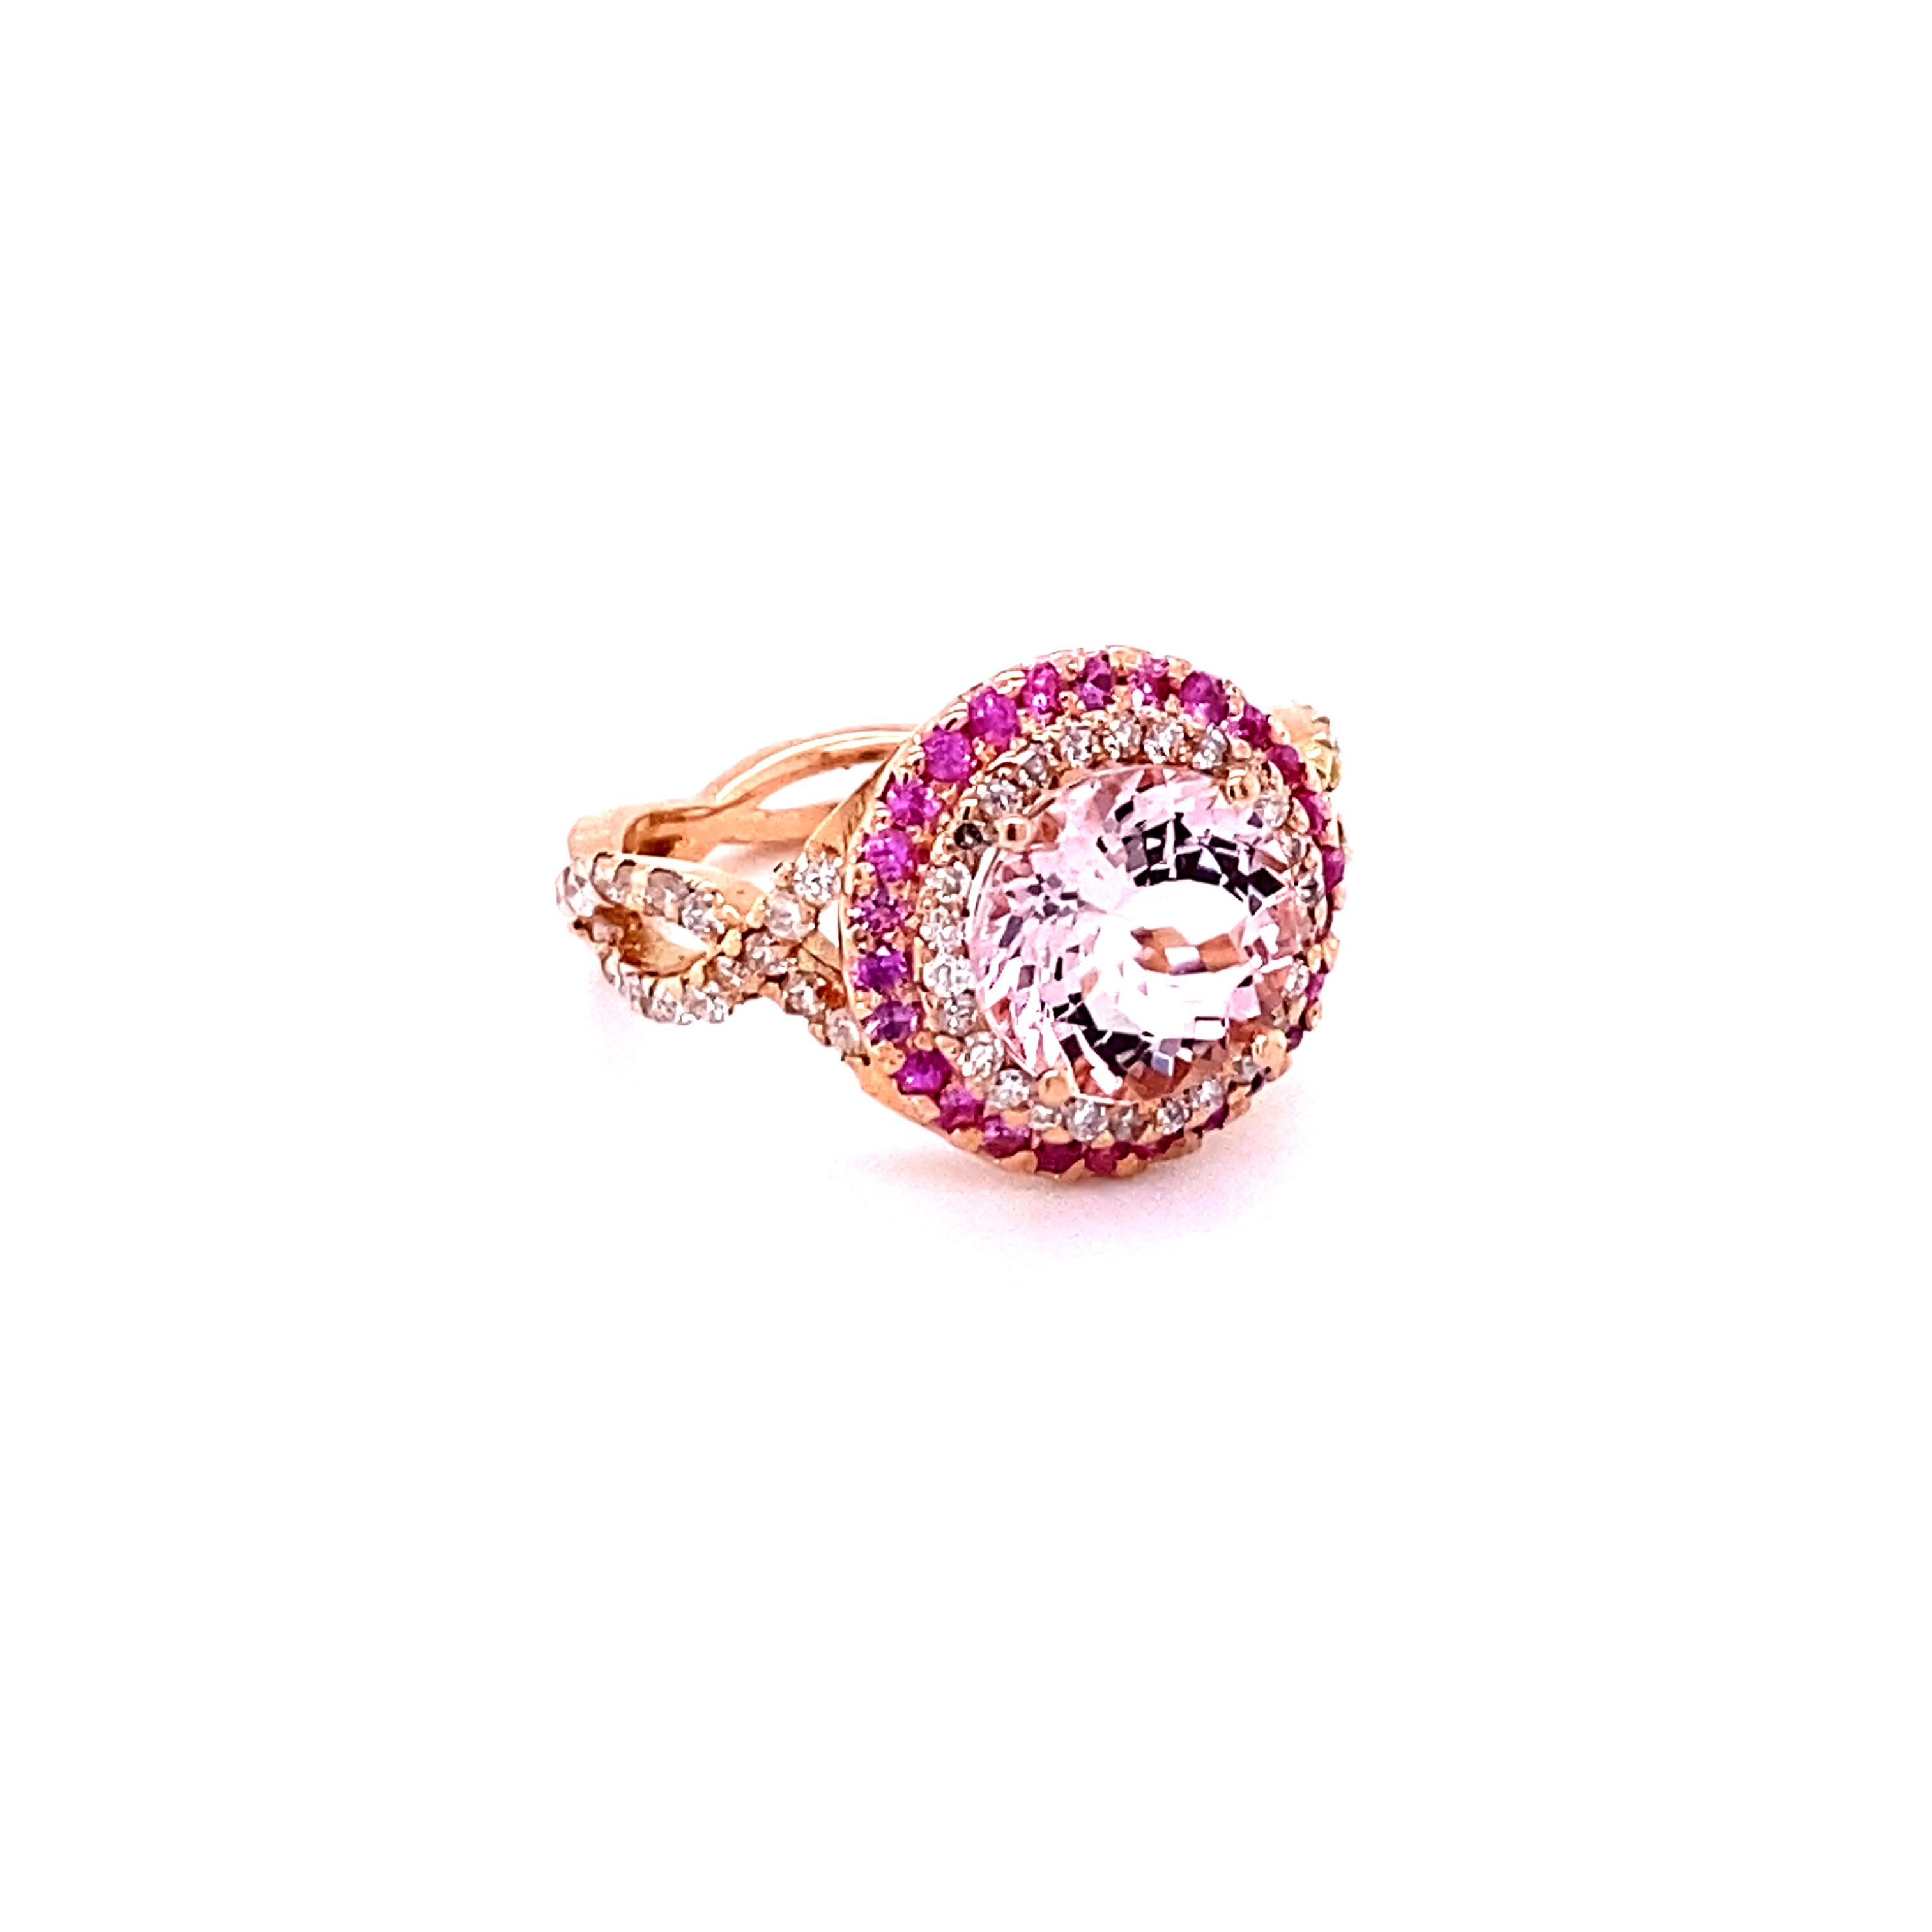 A lovely Engagement Ring Option or as an alternate to a Pink Diamond Ring! A Stunning Statement. 

This gorgeous and classy Morganite Diamond Ring has a 2.24 Carat Round Cut Pink Morganite and has a Halo of 80 Round Cut Diamonds that weigh 0.70